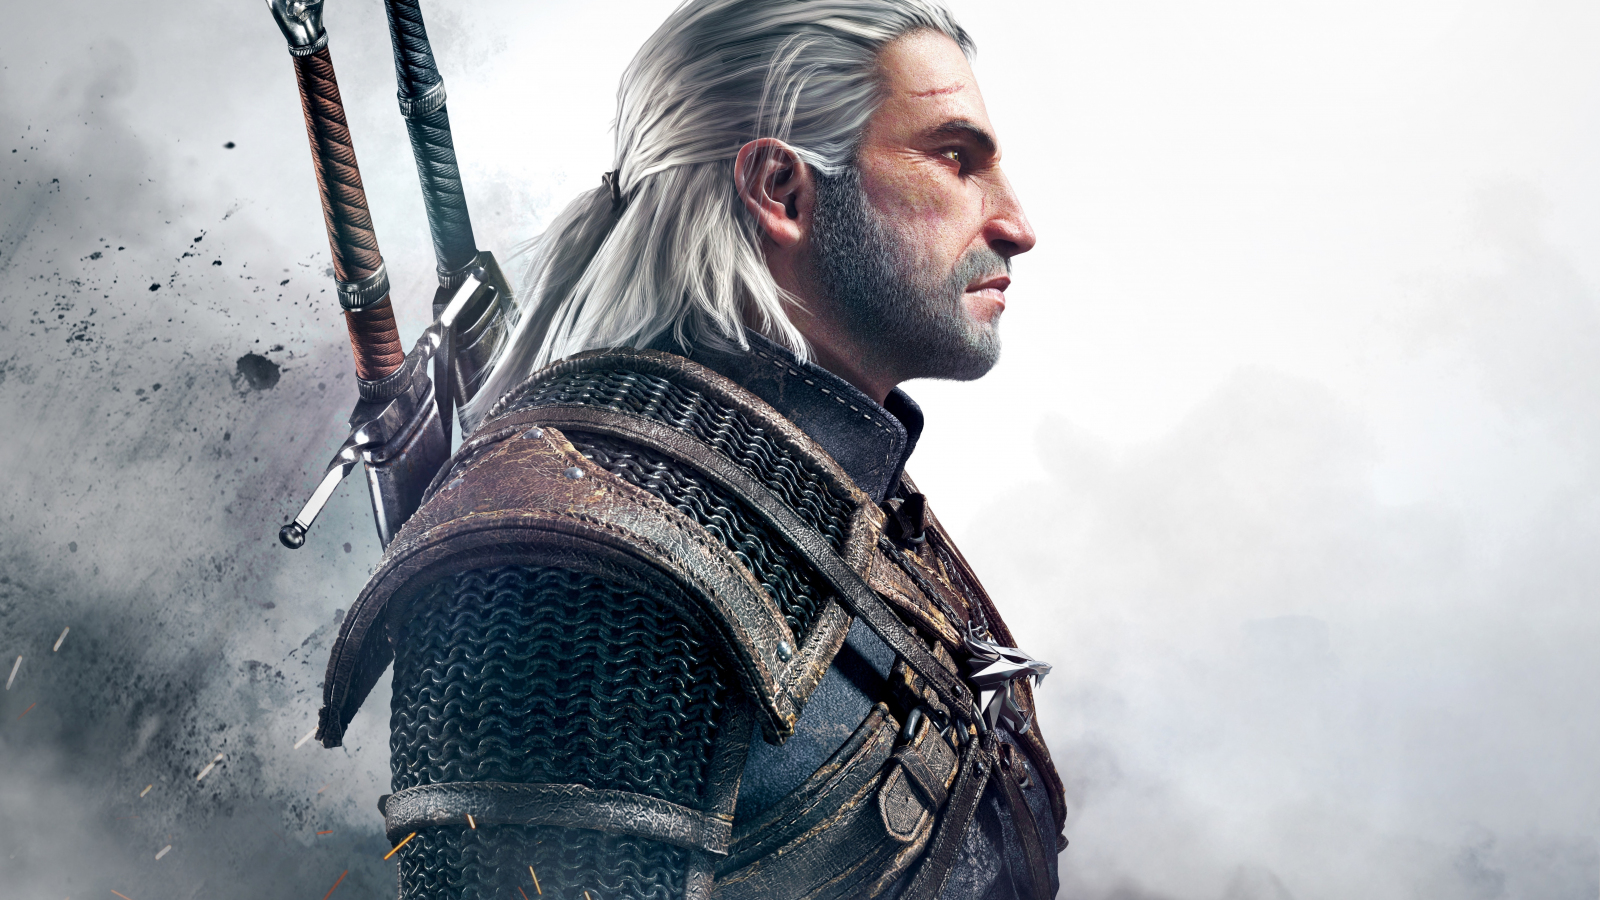 Download 1600x900 wallpaper geralt of rivia, the witcher 3 ...